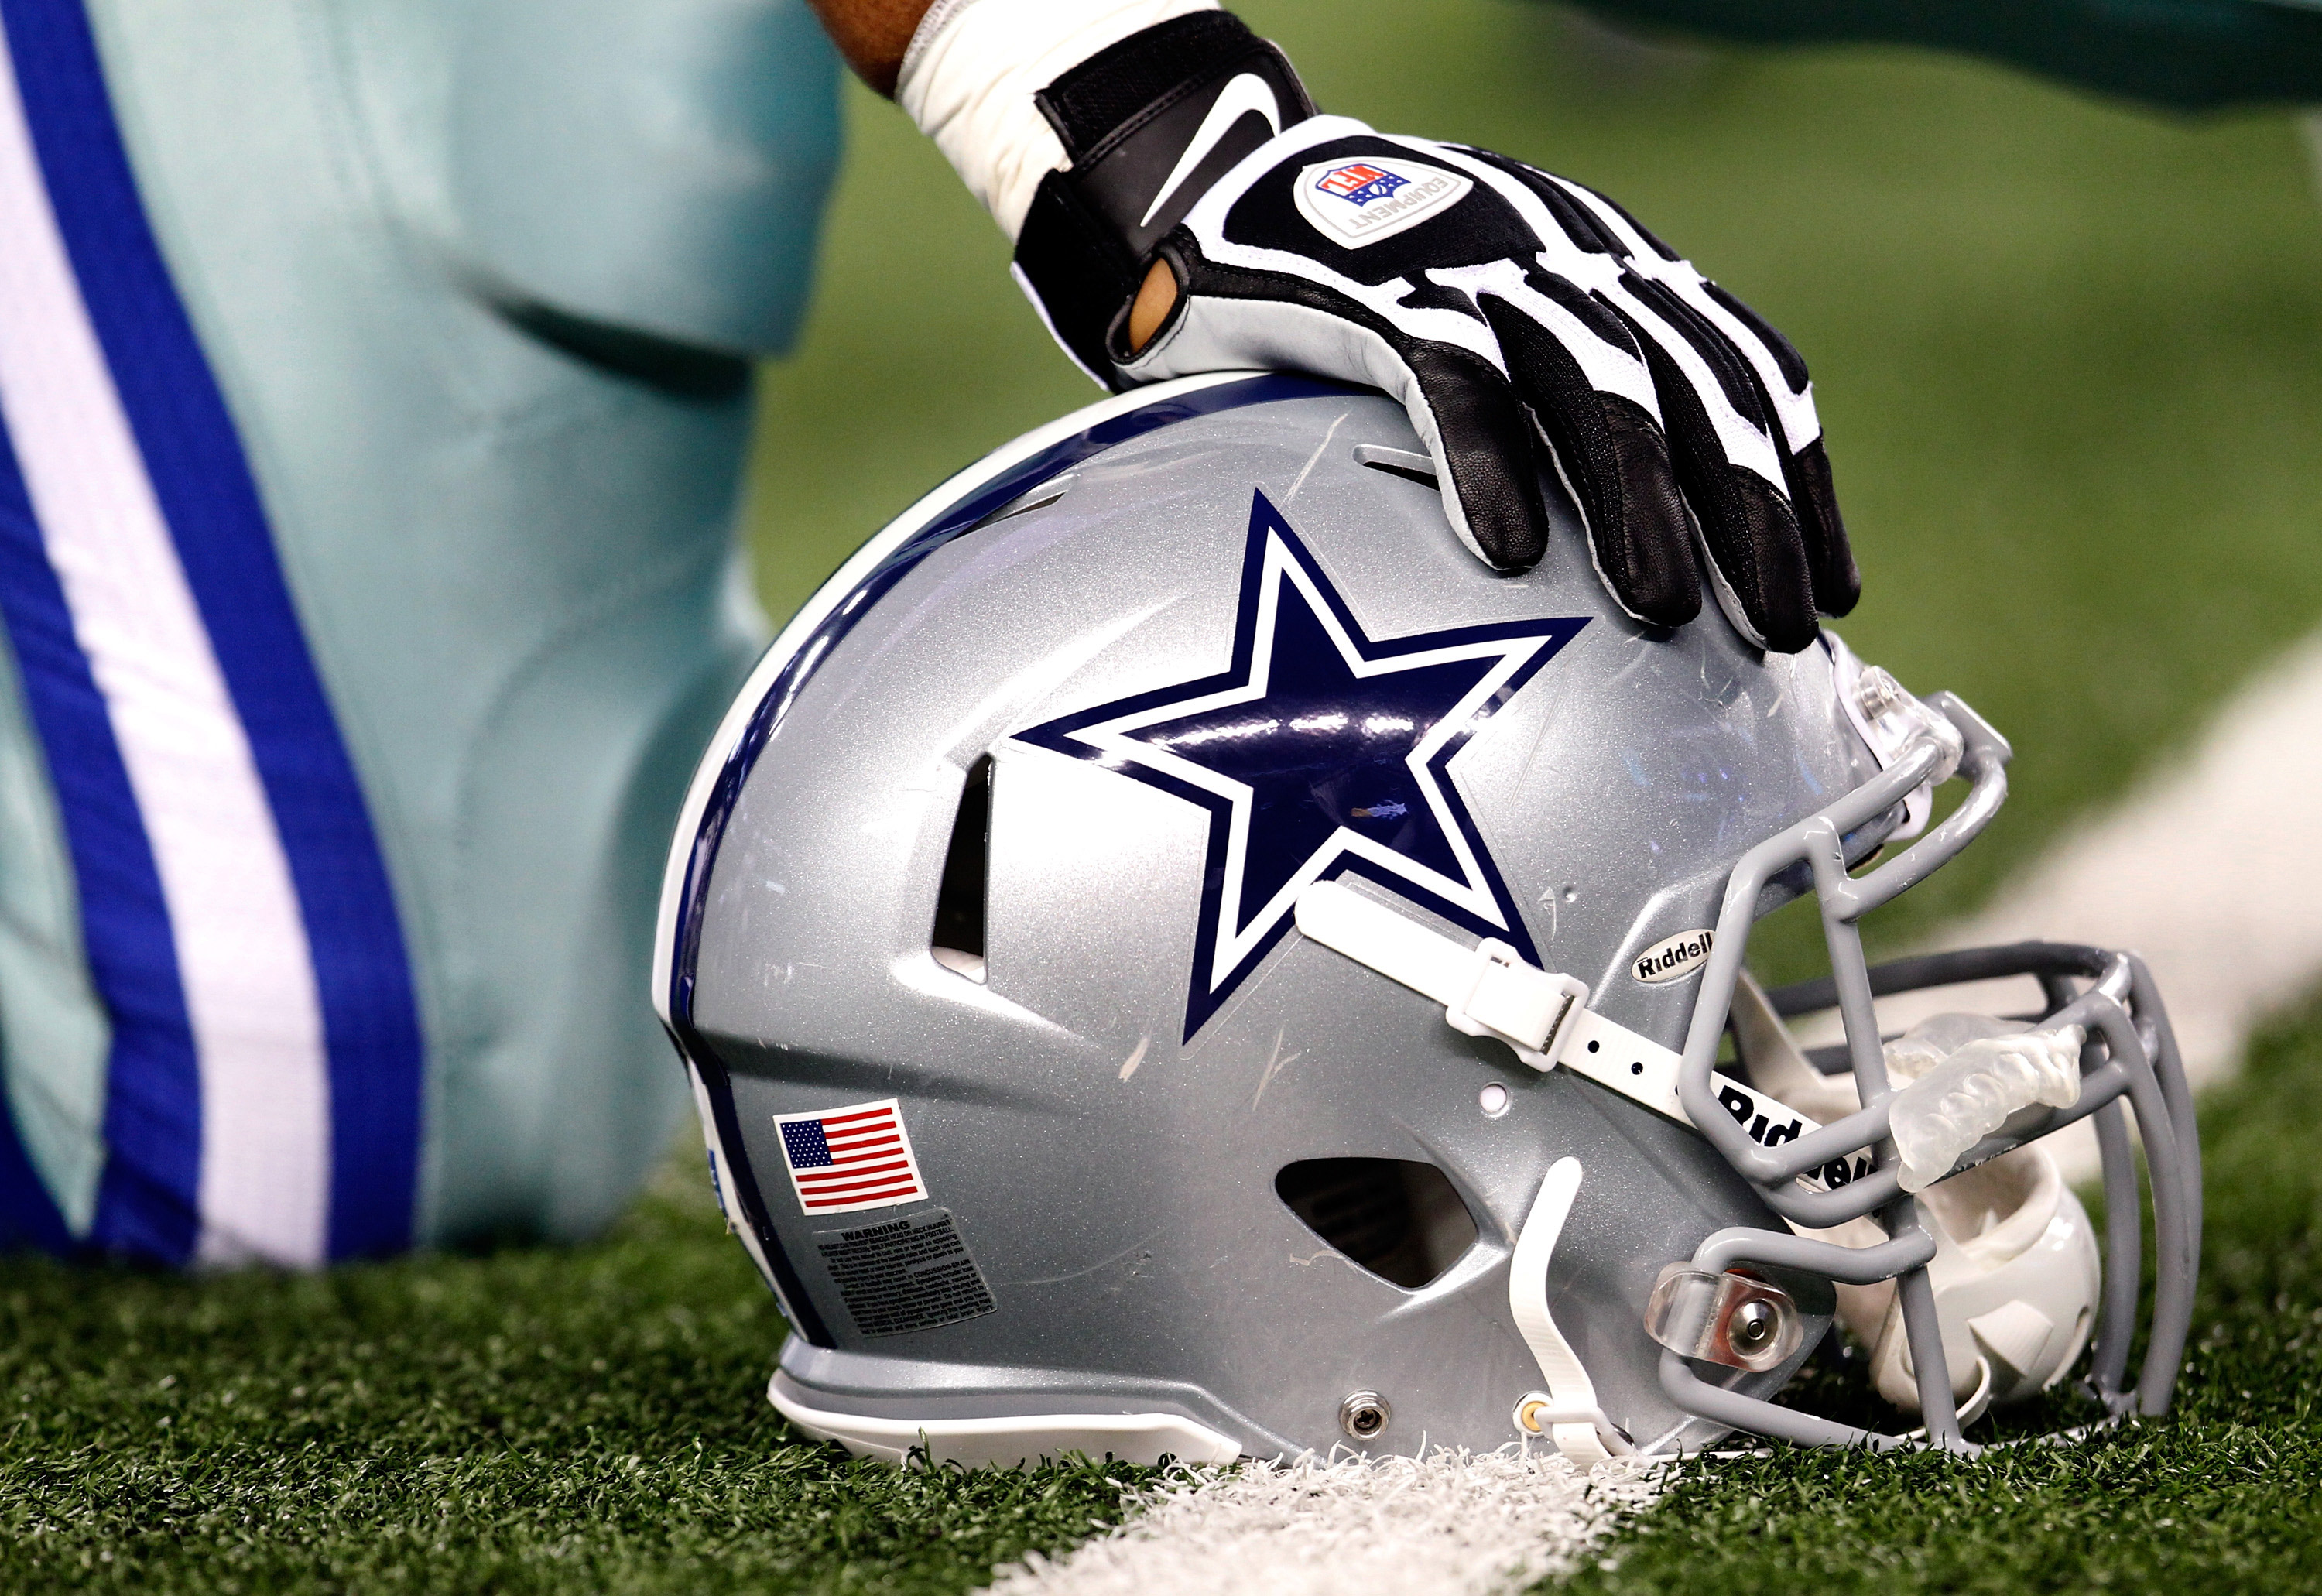 Nfl Network Several Dallas Cowboys And Houston Texans Players Test Positive For Coronavirus Cnn Video